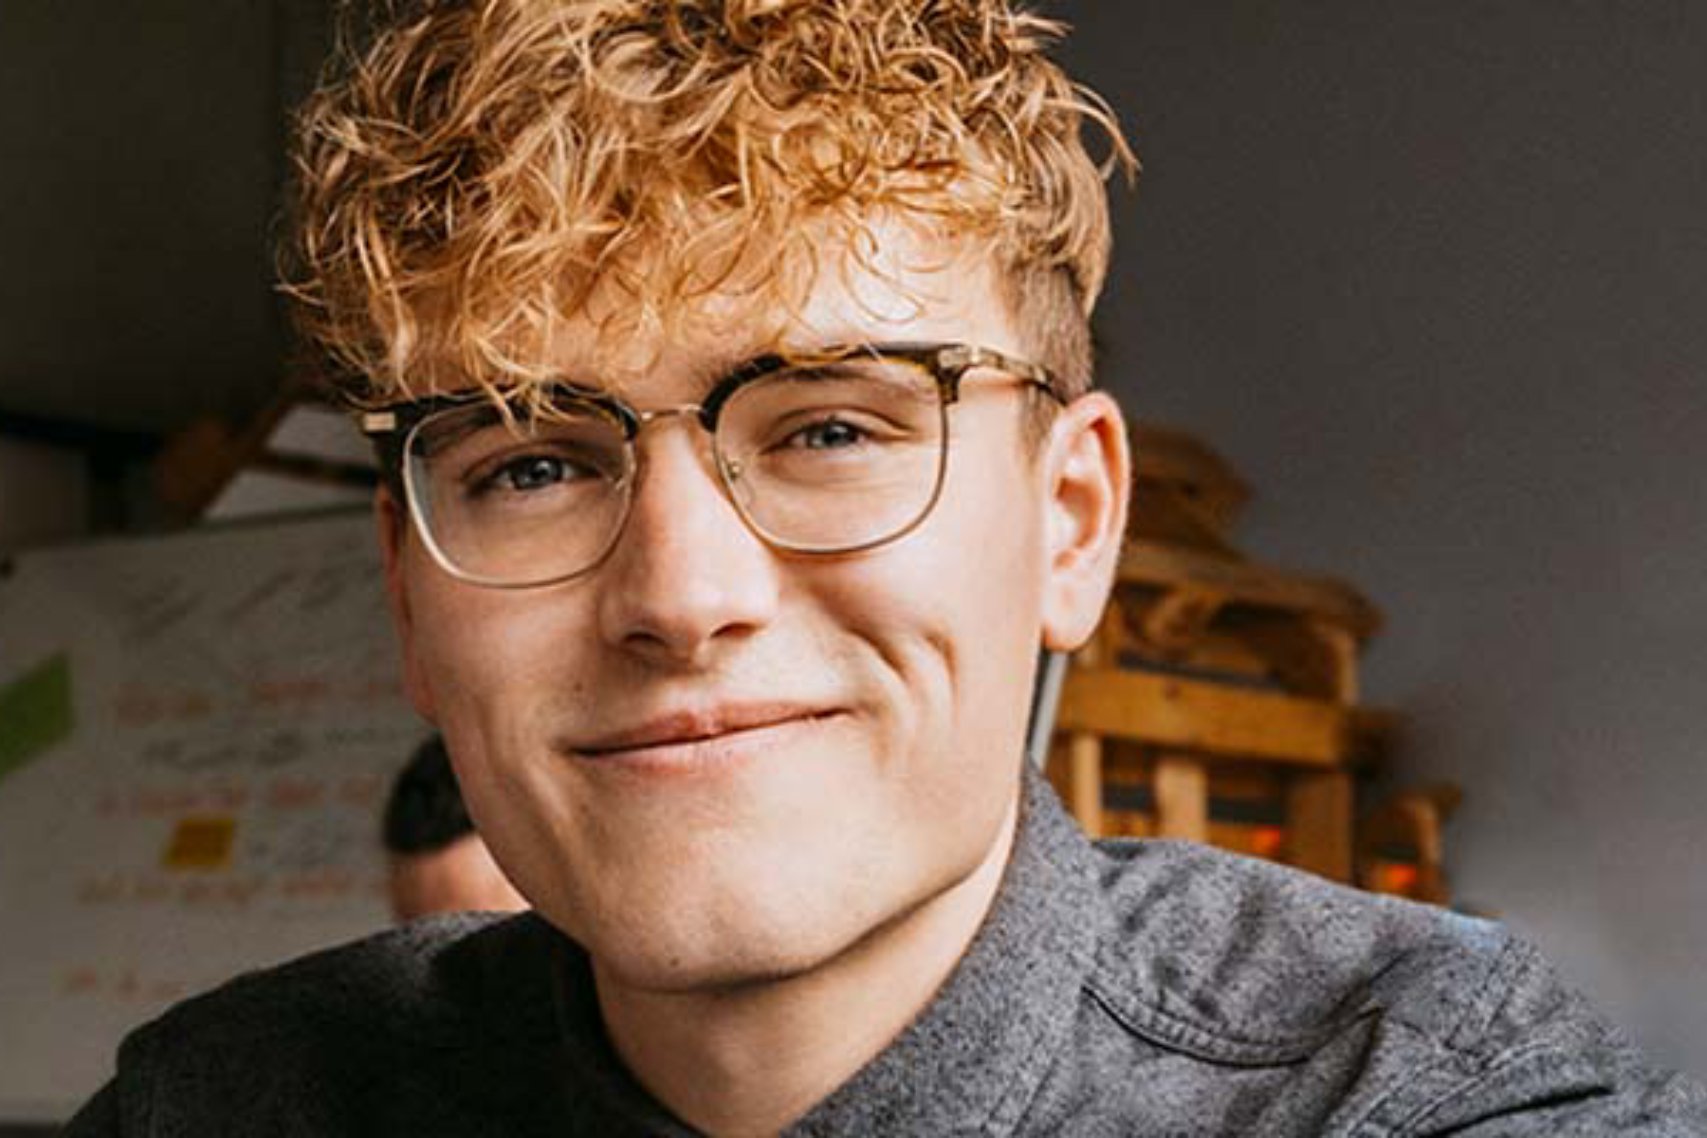 Blonde curly haired man with glasses